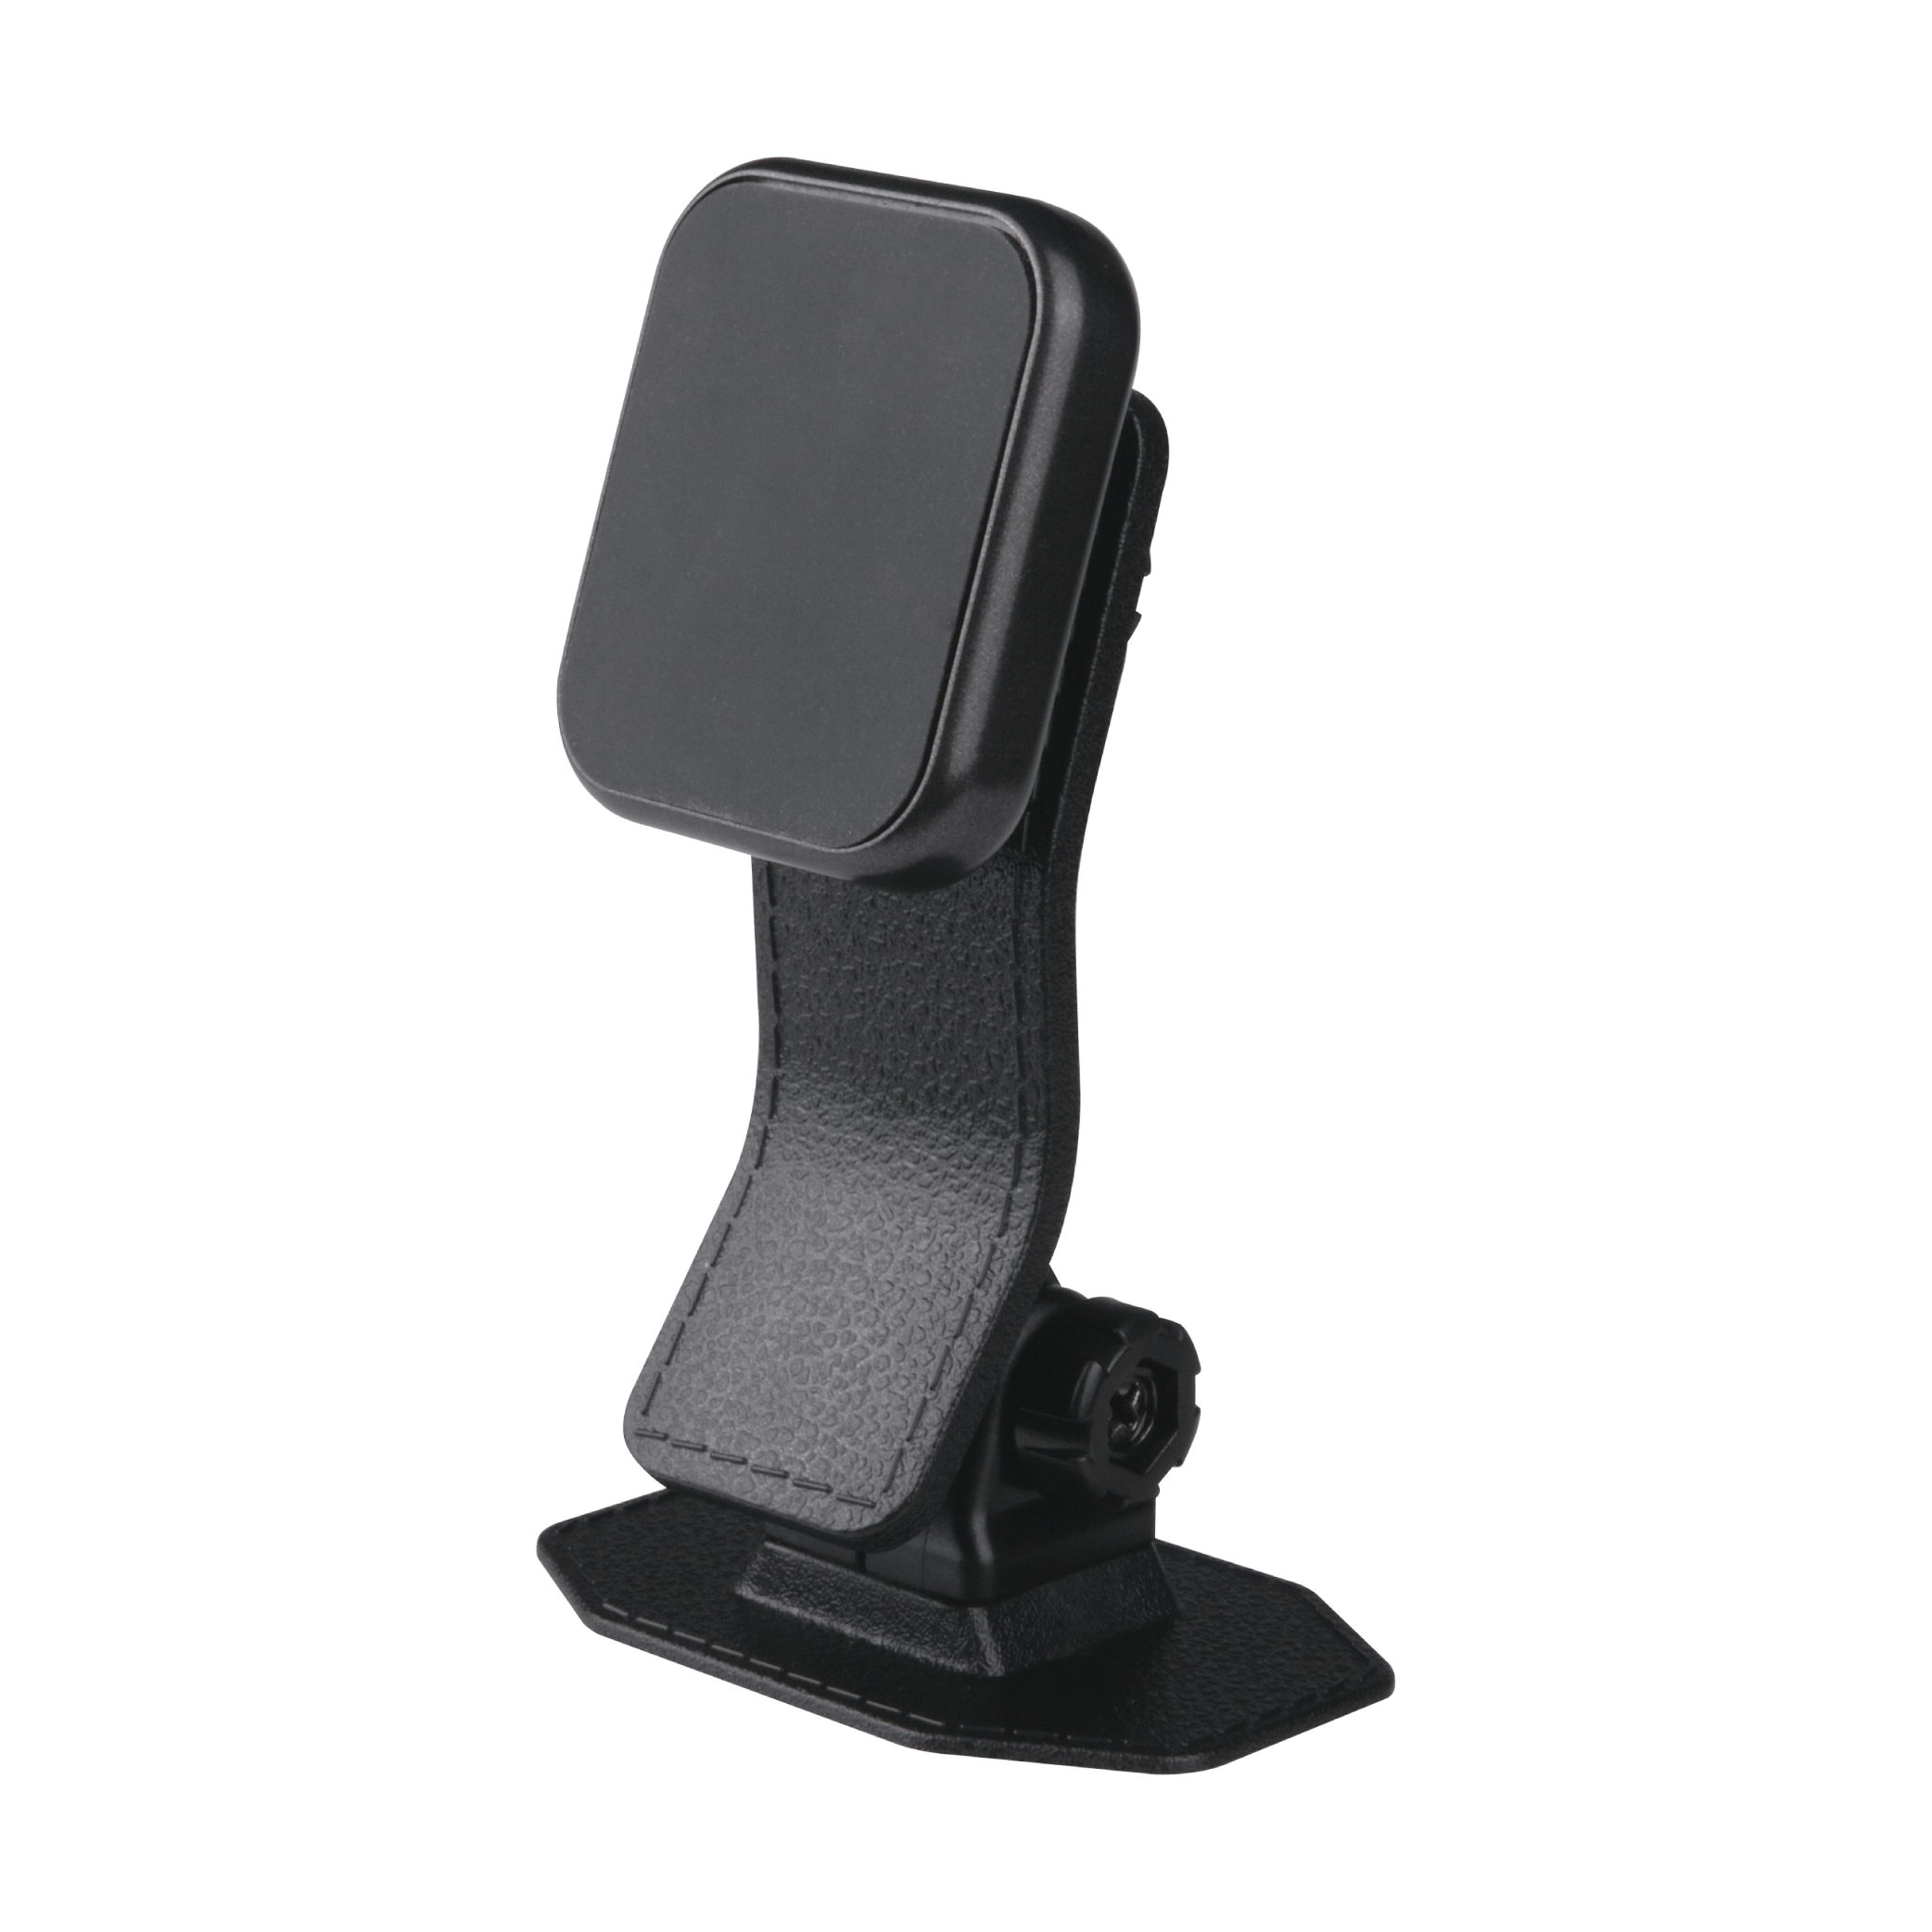 ADJUSTABLE MAGNETIC PHONE STAND HPS-1001